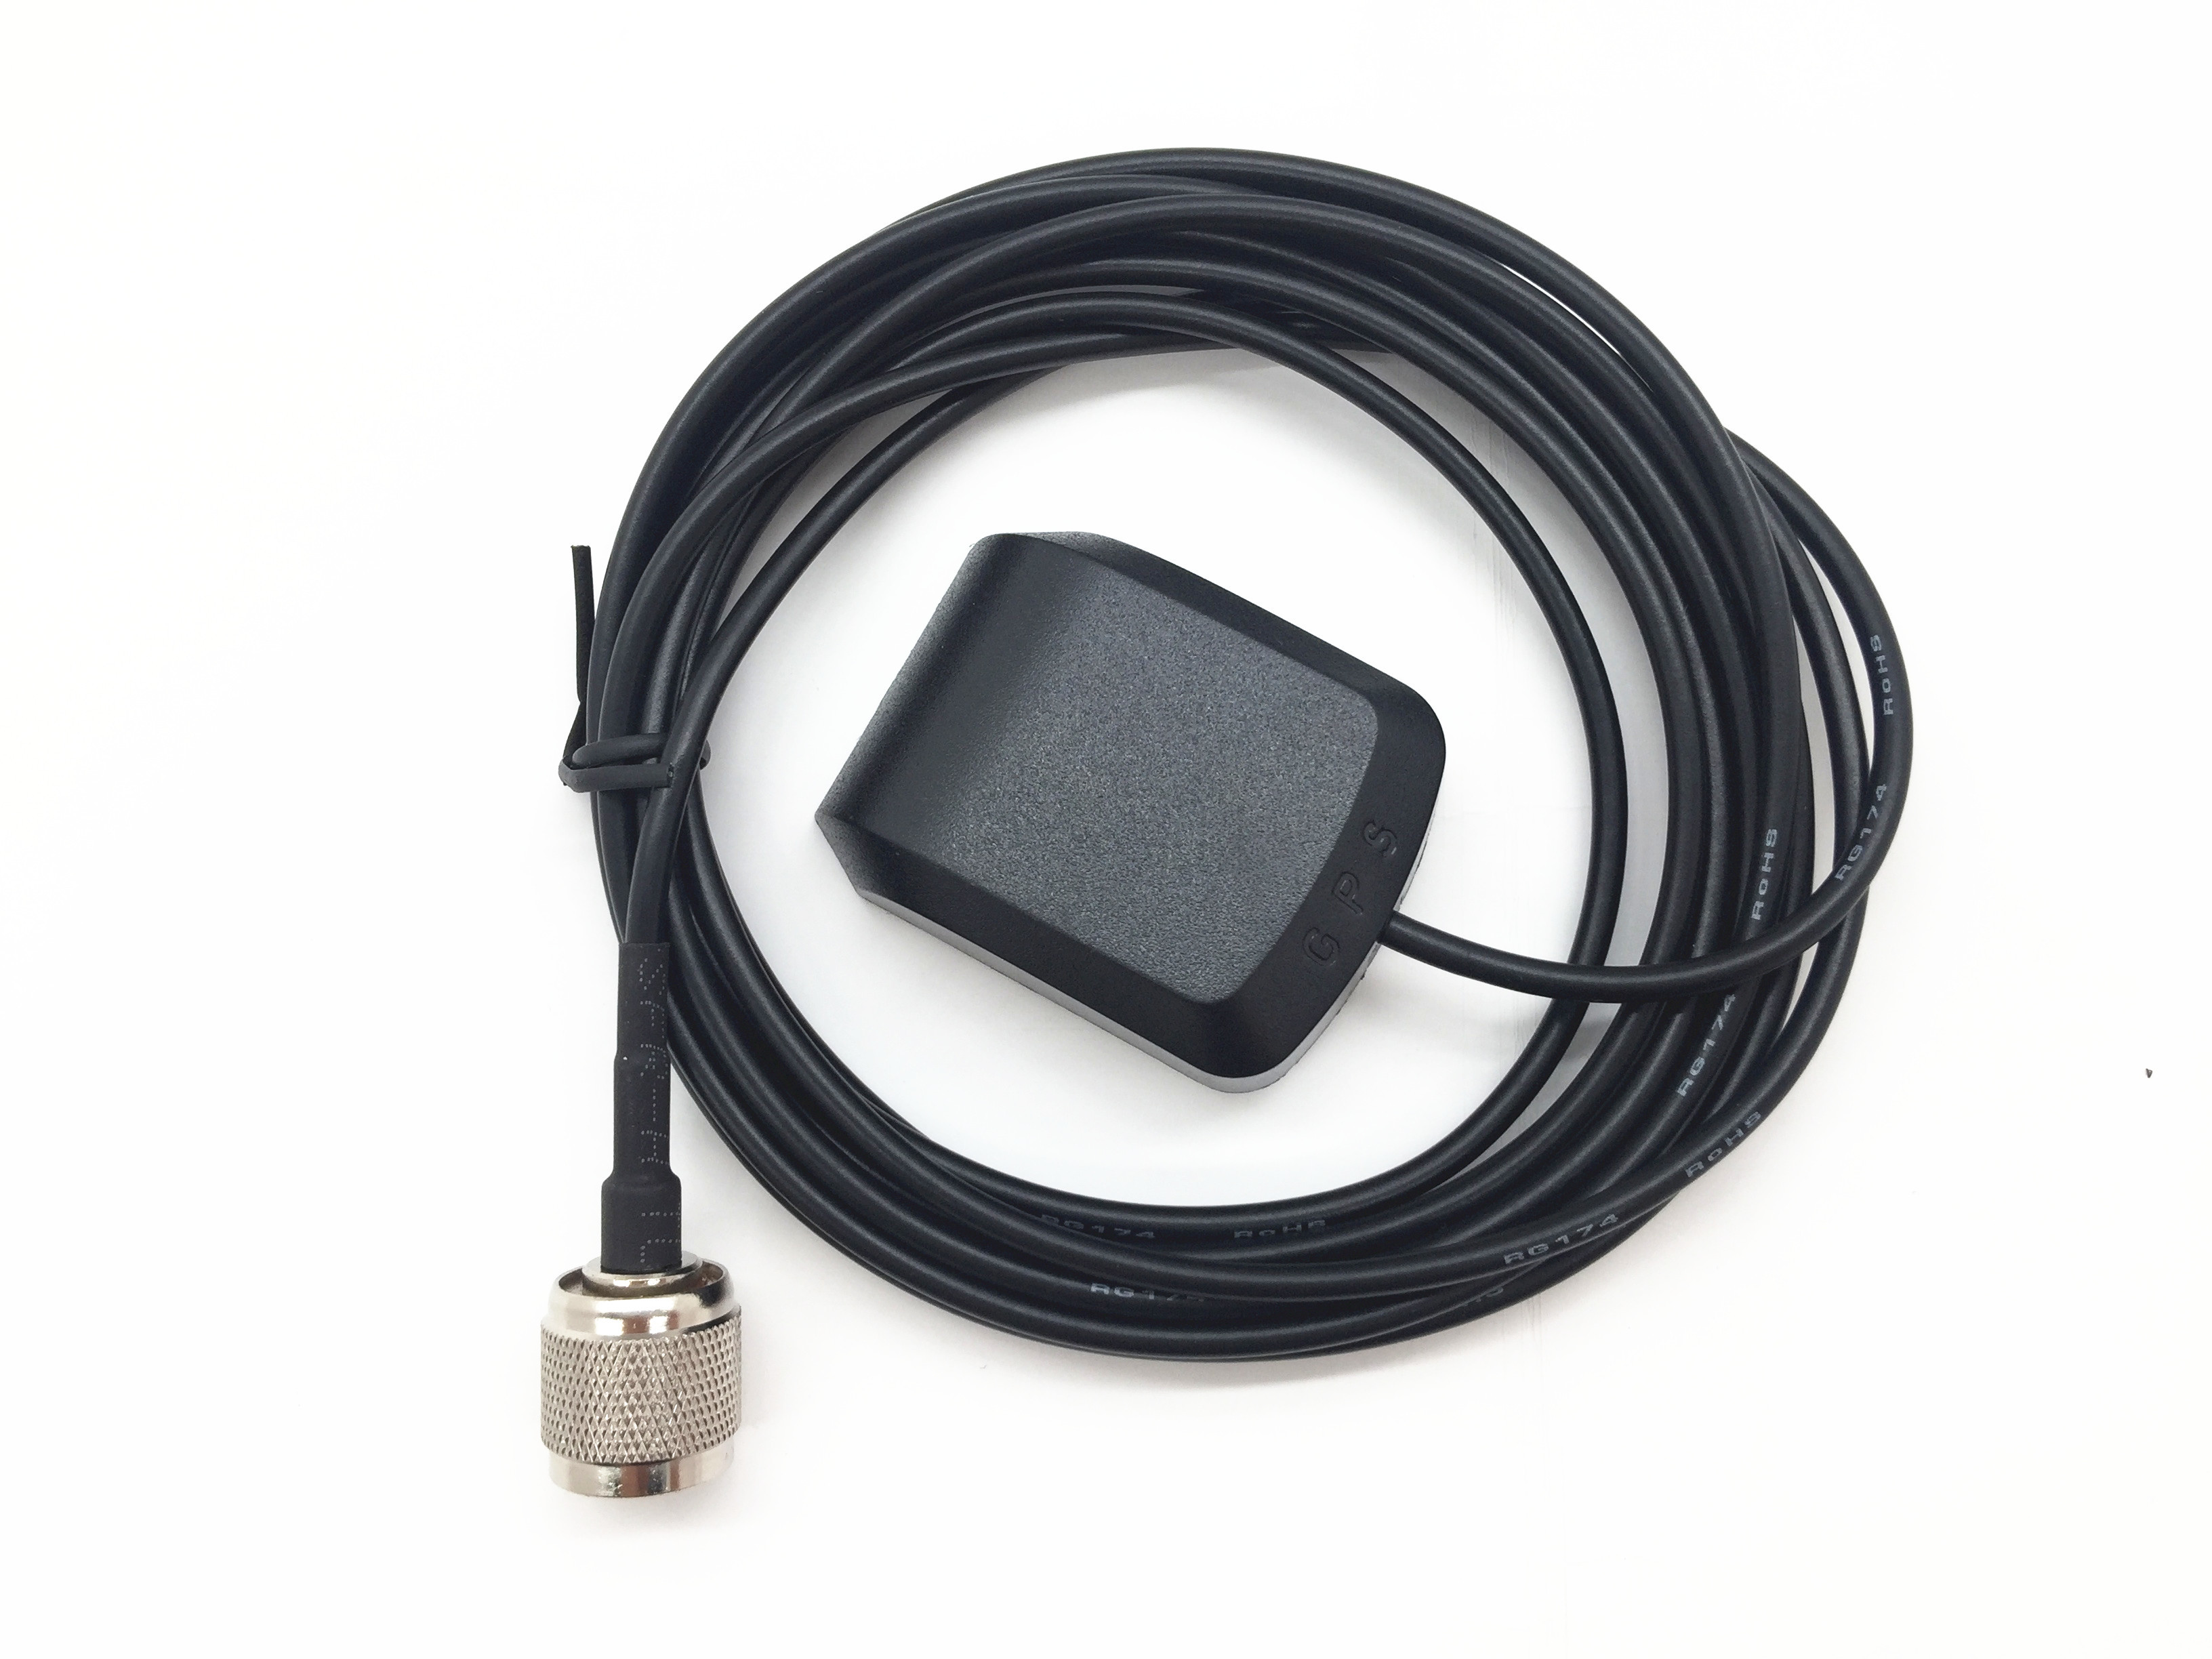 China TNC Male Connector Portable Car GPS Antenna , Vehicle Gps Antenna With RG 174 3 M Cable wholesale